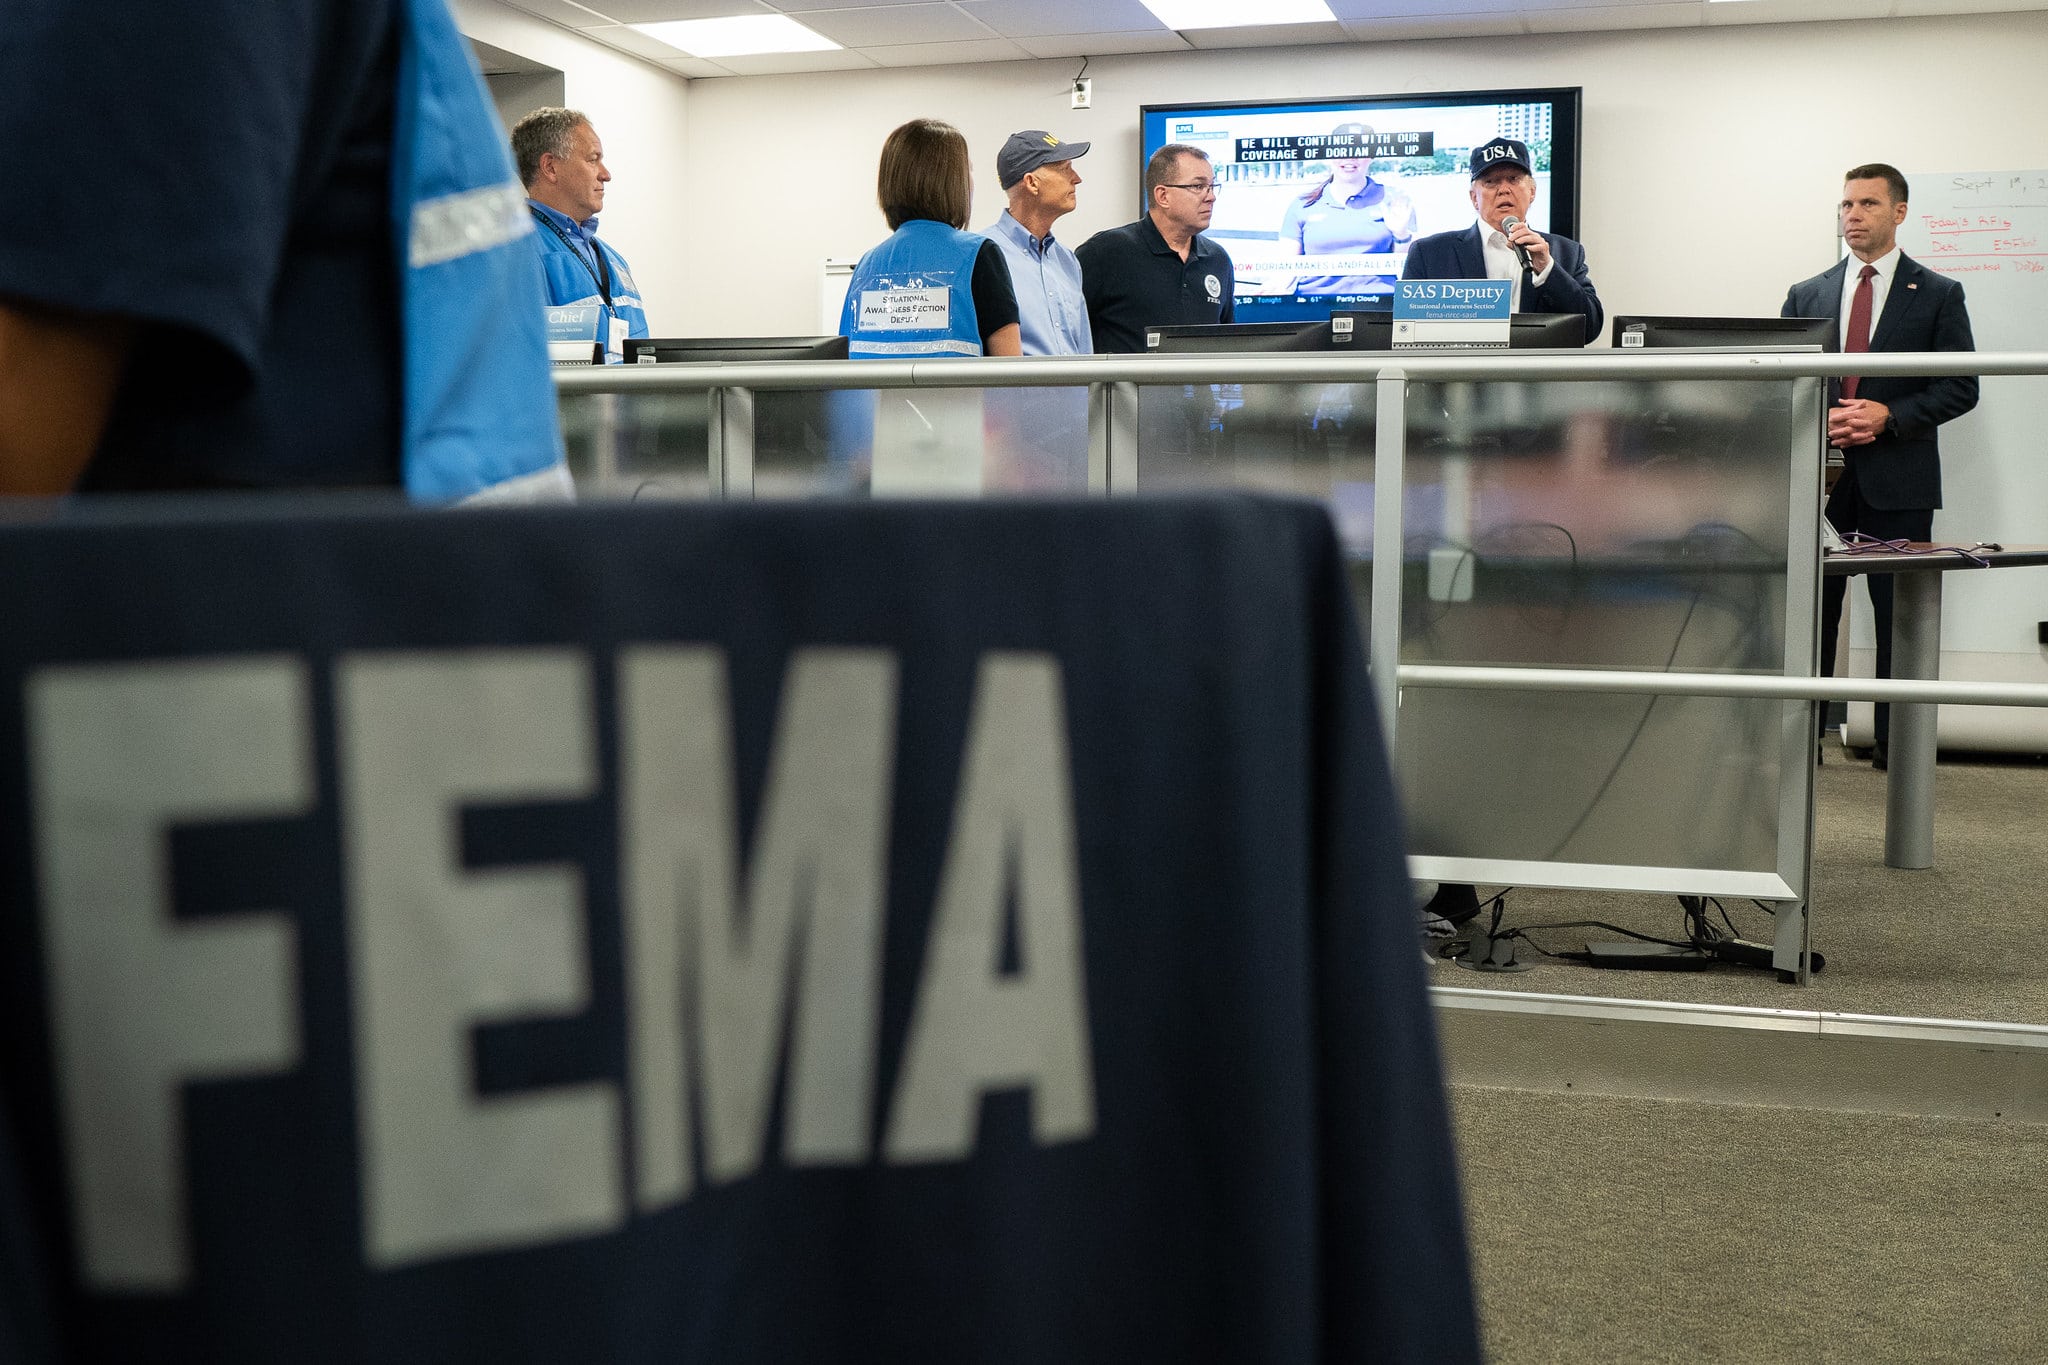 Puerto Rico’s electric system recovery marred by corrupt FEMA official